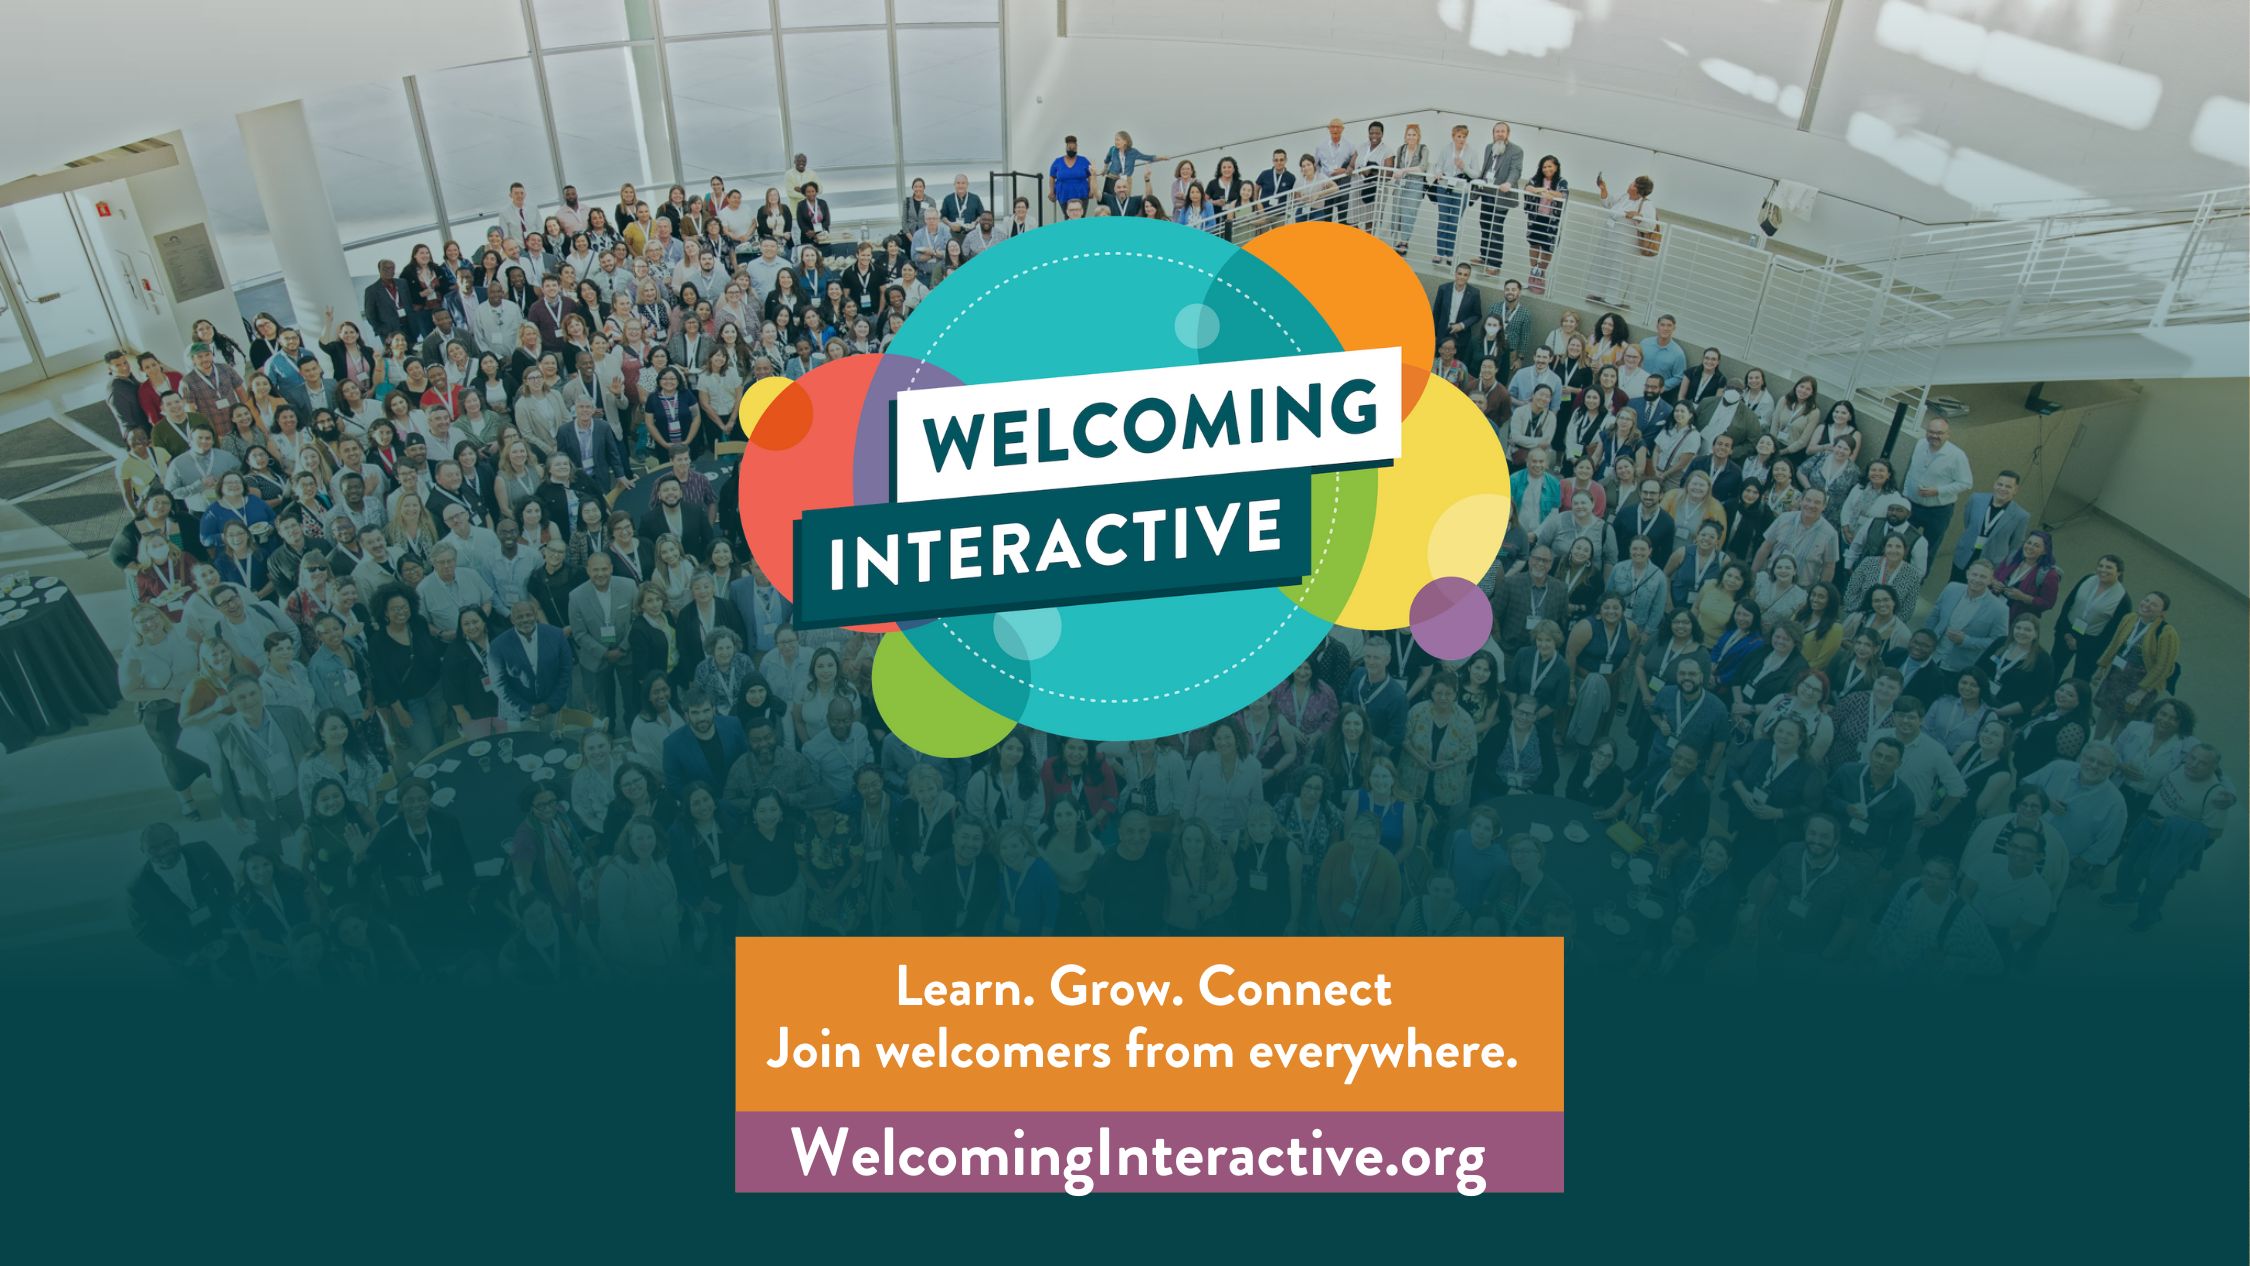 High angle group photo of past Welcoming Interactive attendees, featuring over 500 people. Welcoming Interactive logo, mostly comprised of colorful circles and the words "Welcoming Interactive" is included in the graphic. Other words include: learn, grow, connect. Join welcomers from everywhere.